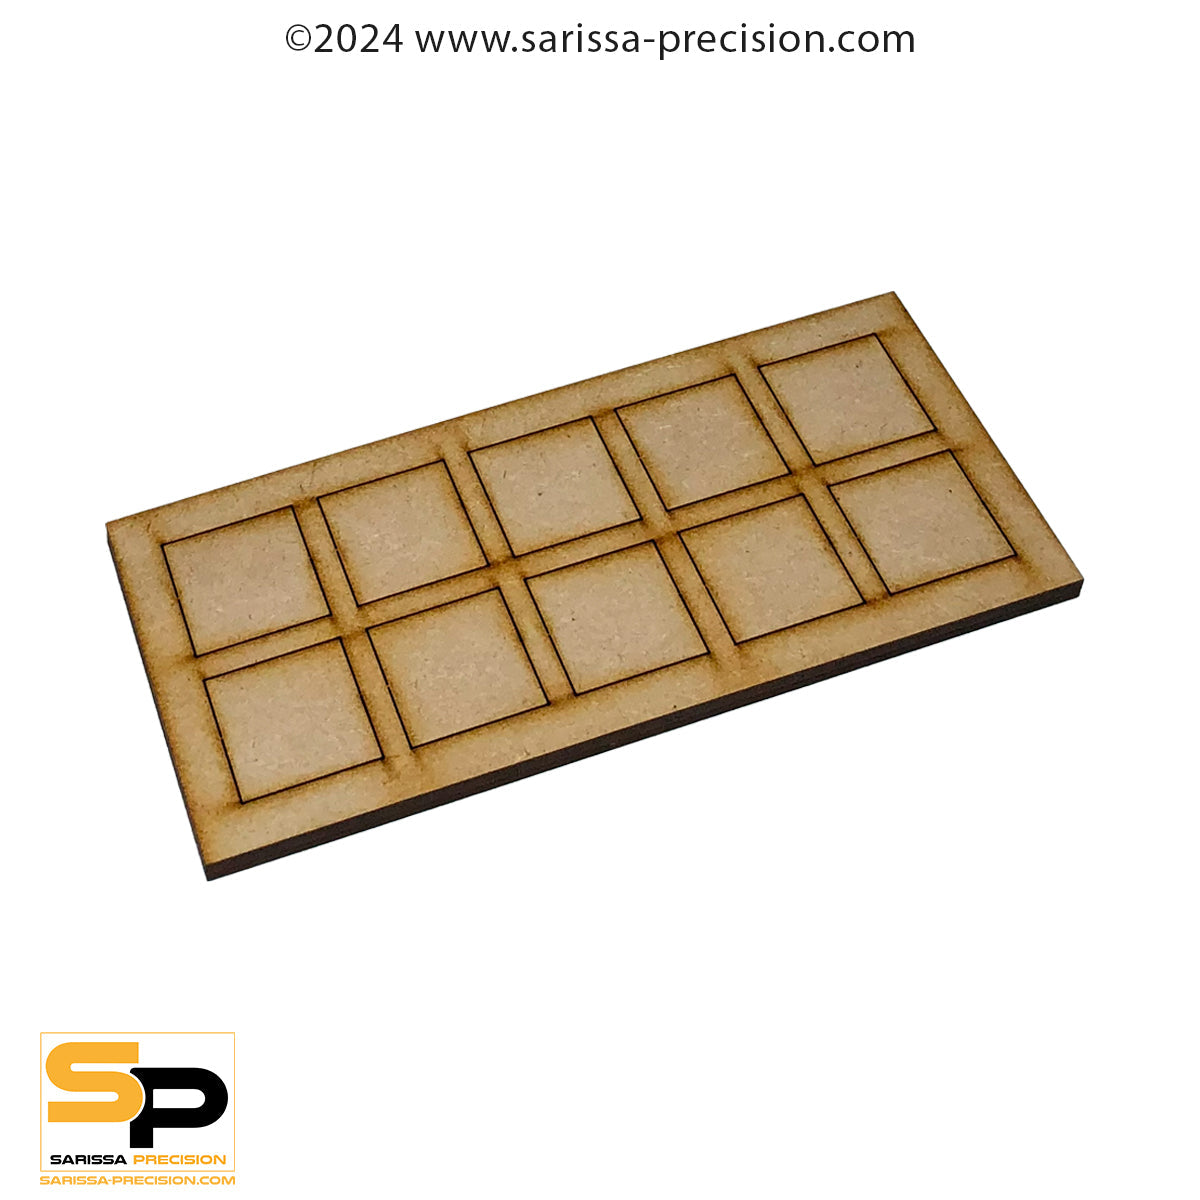 13x8 30x30mm Conversion Tray for 25x25mm bases